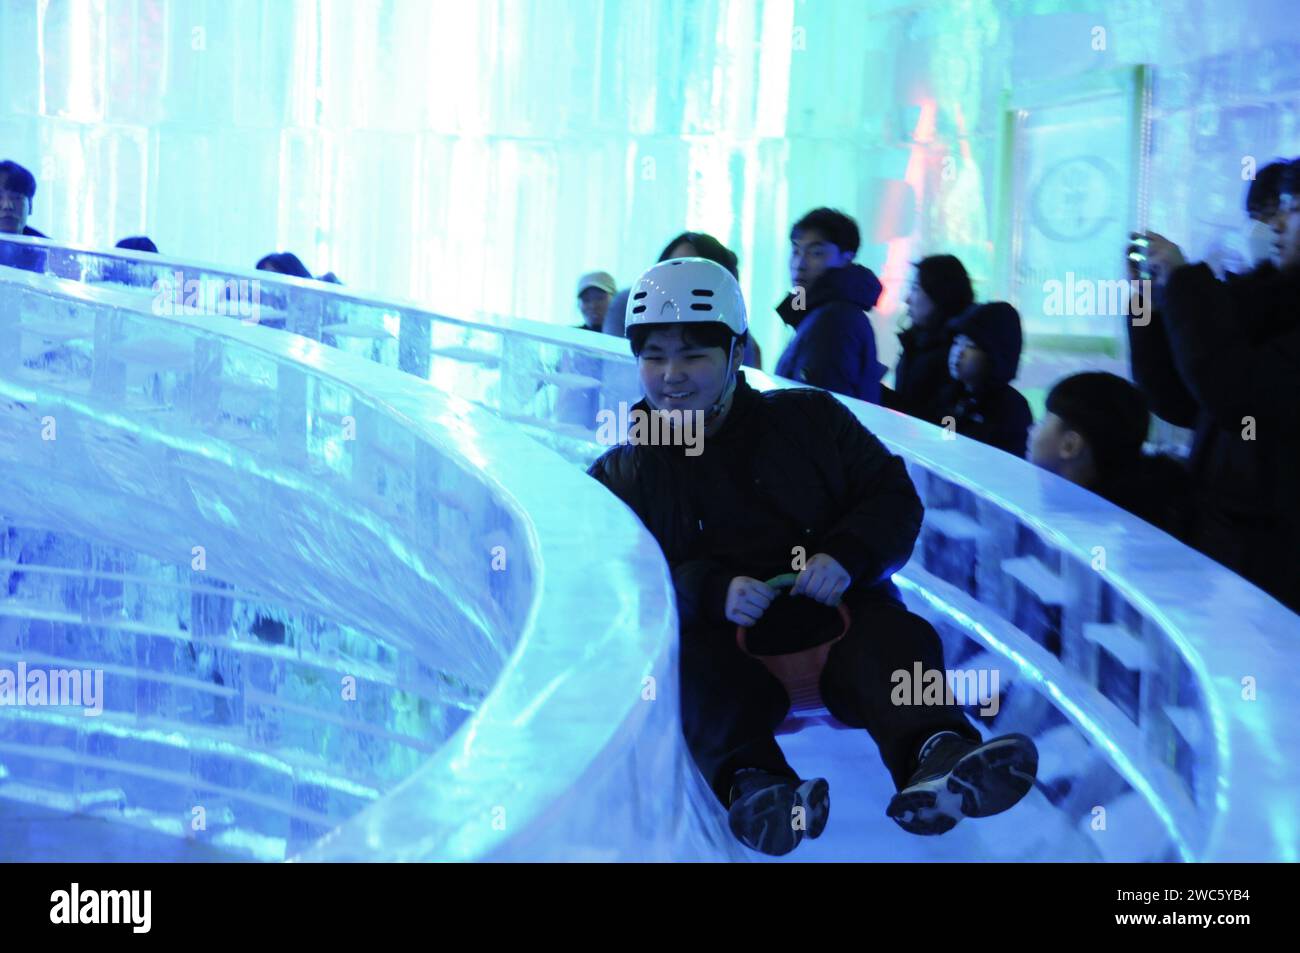 Gangwon Province, South Korea. 13th Jan, 2024. A tourist enjoy an ice slide made by Harbin ice sculptors during Hwacheon Sancheoneo Ice Festival in Gangwon Province, South Korea, Jan. 13, 2024. The capital of China's northernmost province of Heilongjiang, Harbin is renowned as the 'crown jewel of ice and snow' in the country. This year ice sculptors from Harbin have been invited to create ice sculptures for the Hwacheon Sancheoneo Ice Festival, one of the most popular South Korean winter festivals. Credit: Yang Chang/Xinhua/Alamy Live News Stock Photo